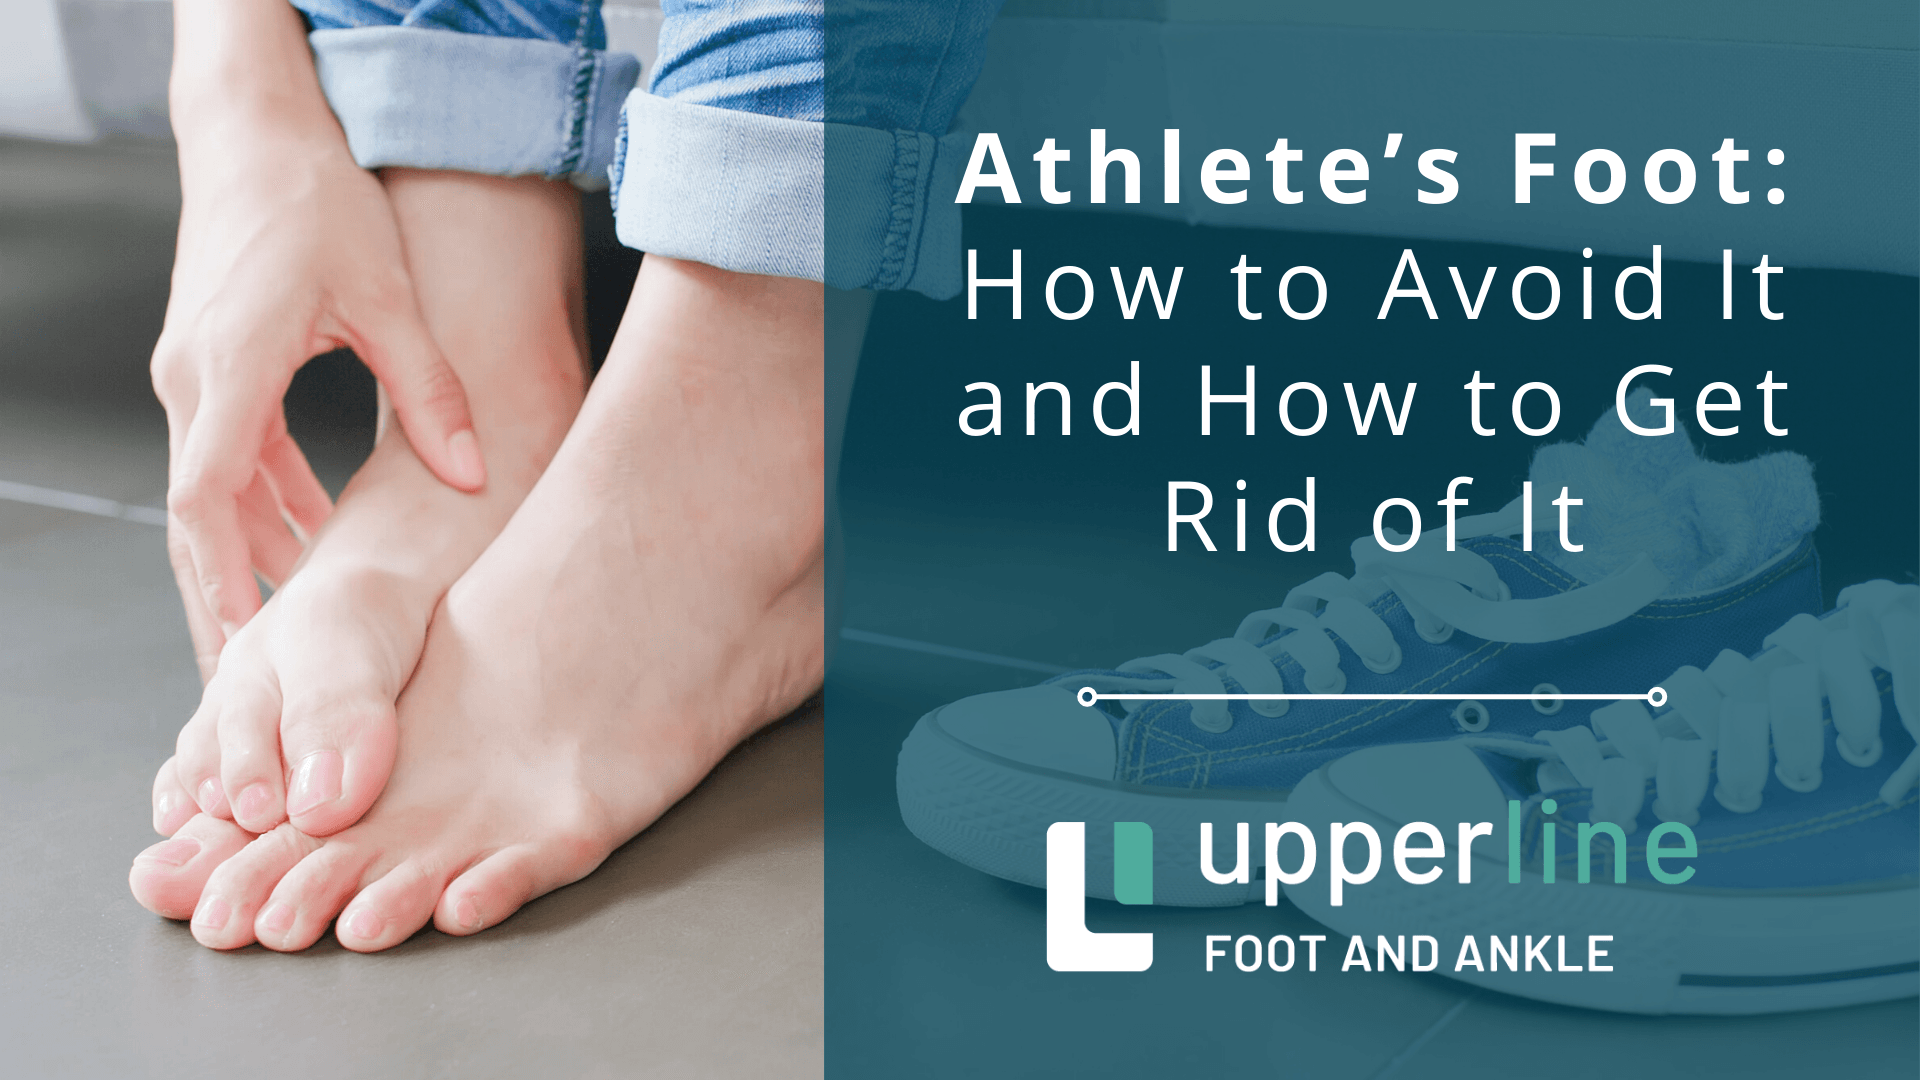 How to avoid athlete's foot